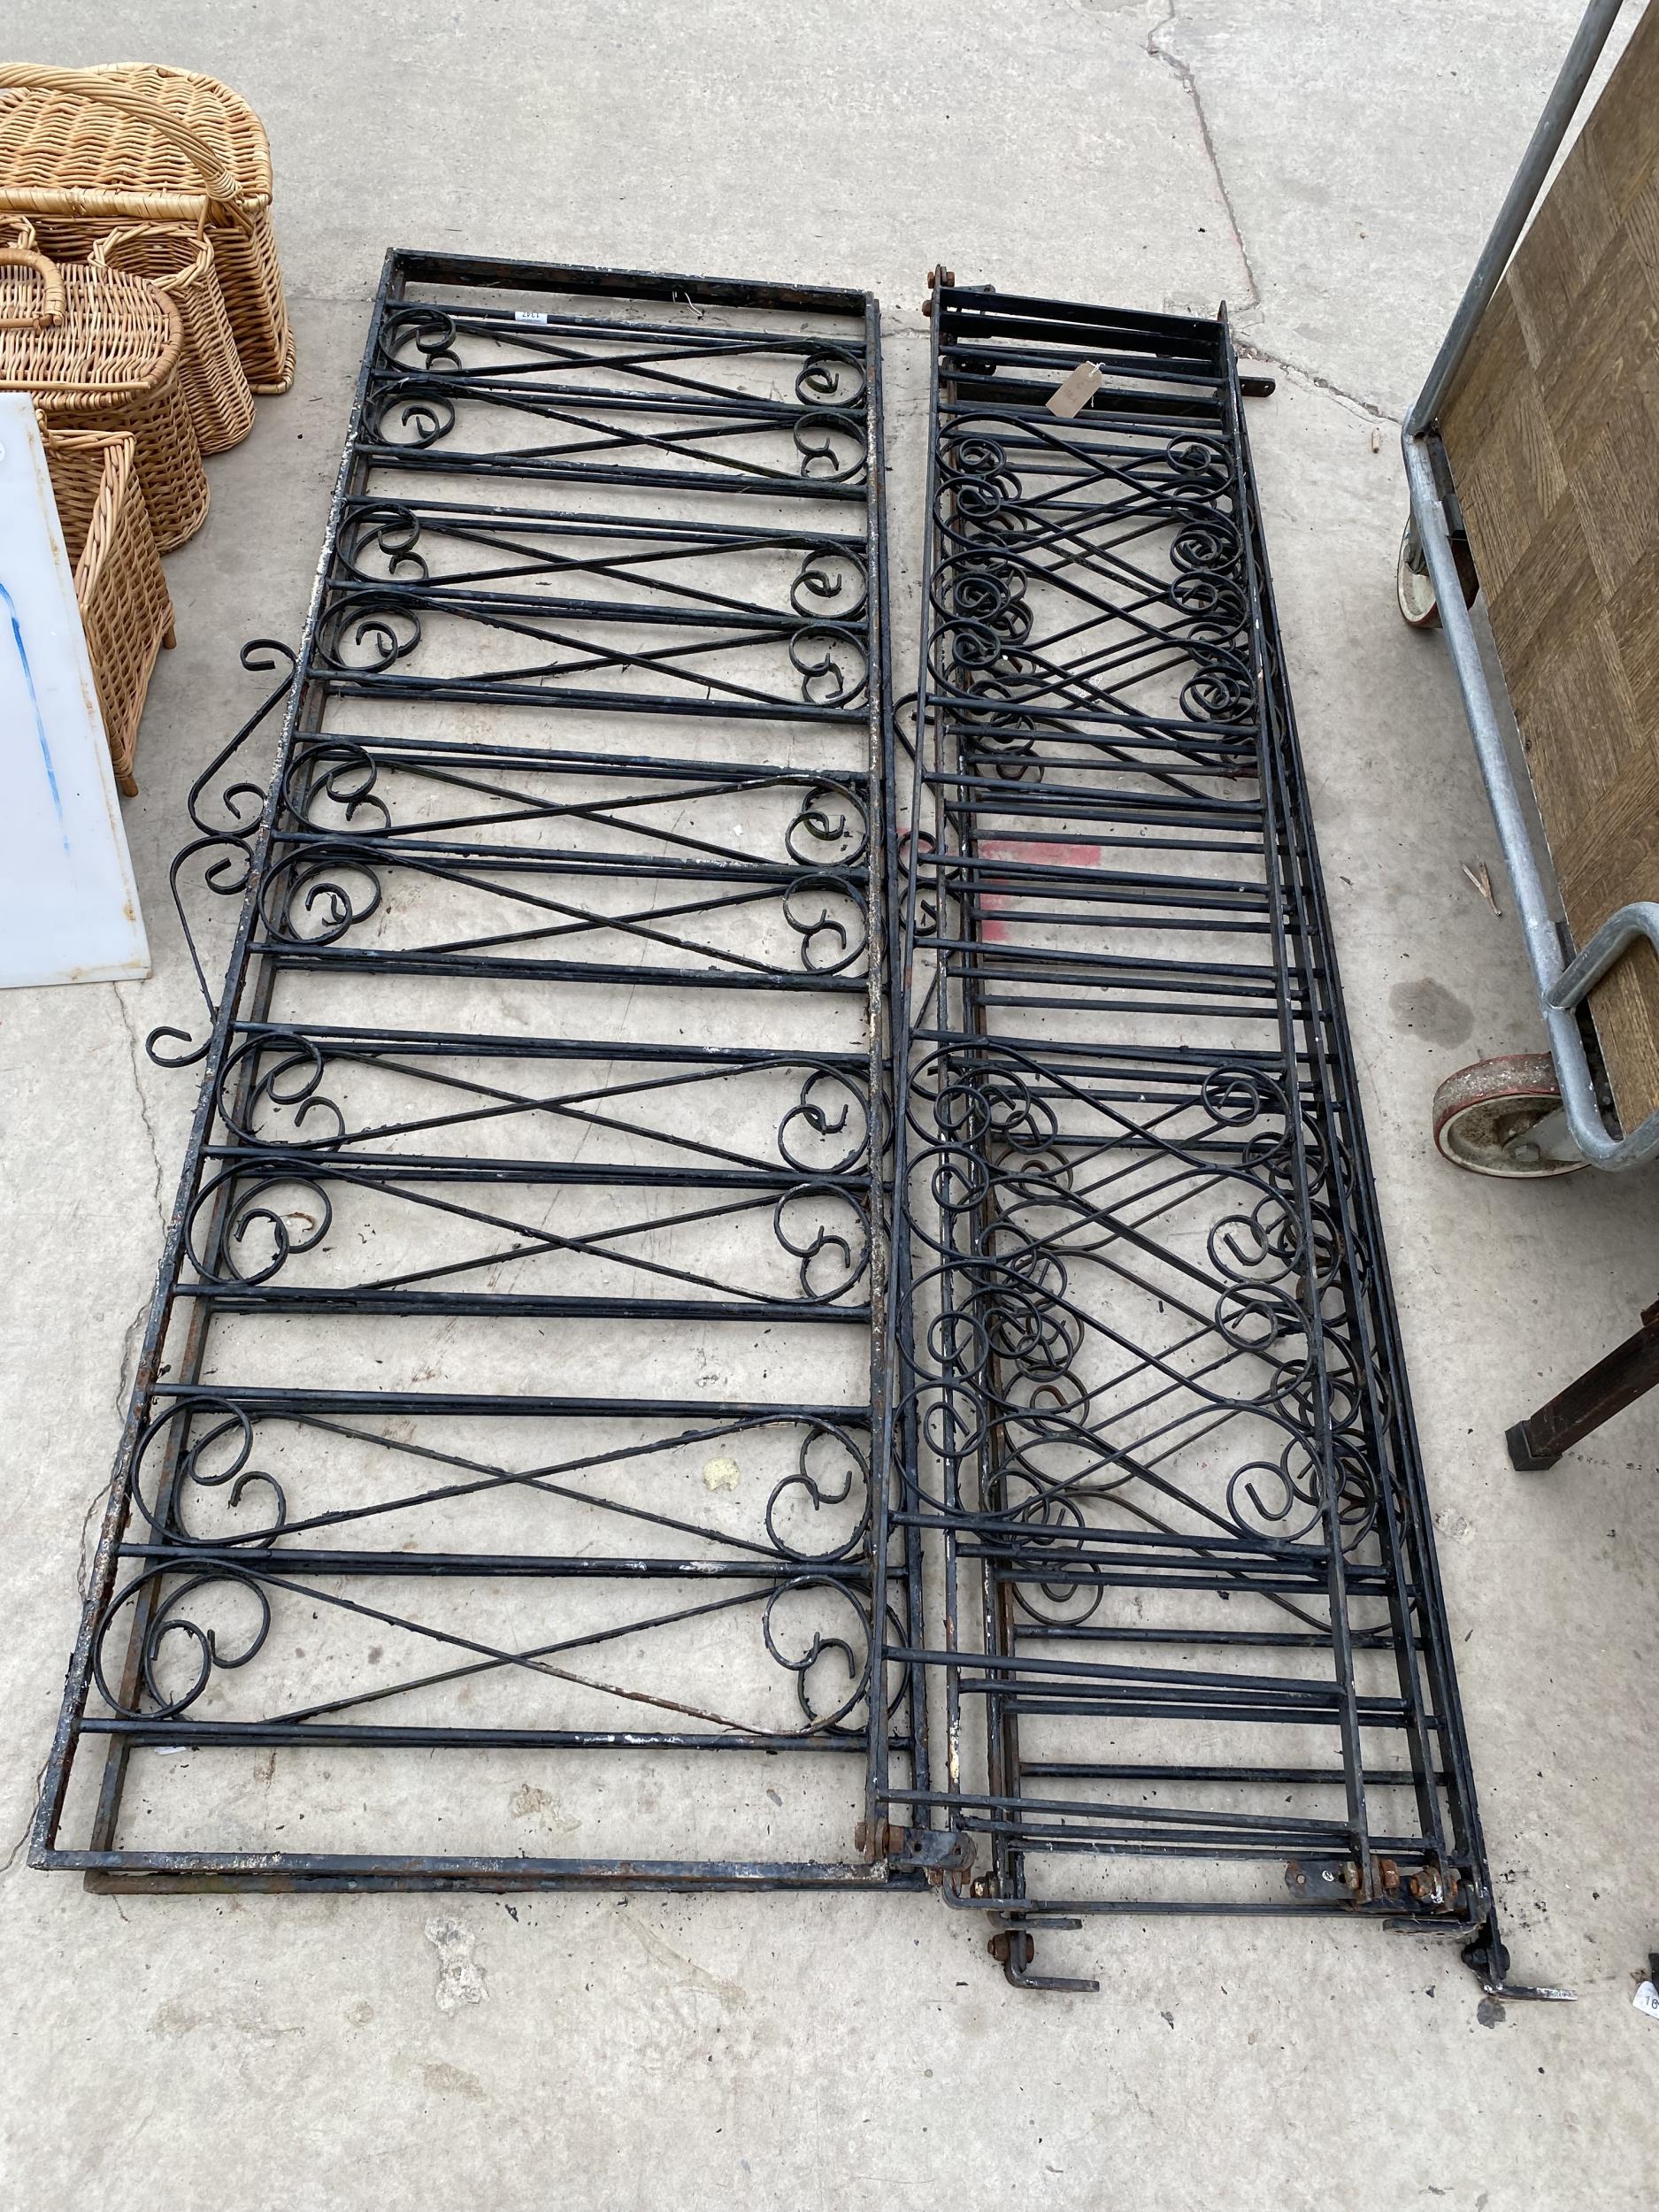 SIX SECTIONS OF DECORATIVE METAL RAILINGS - Image 3 of 3